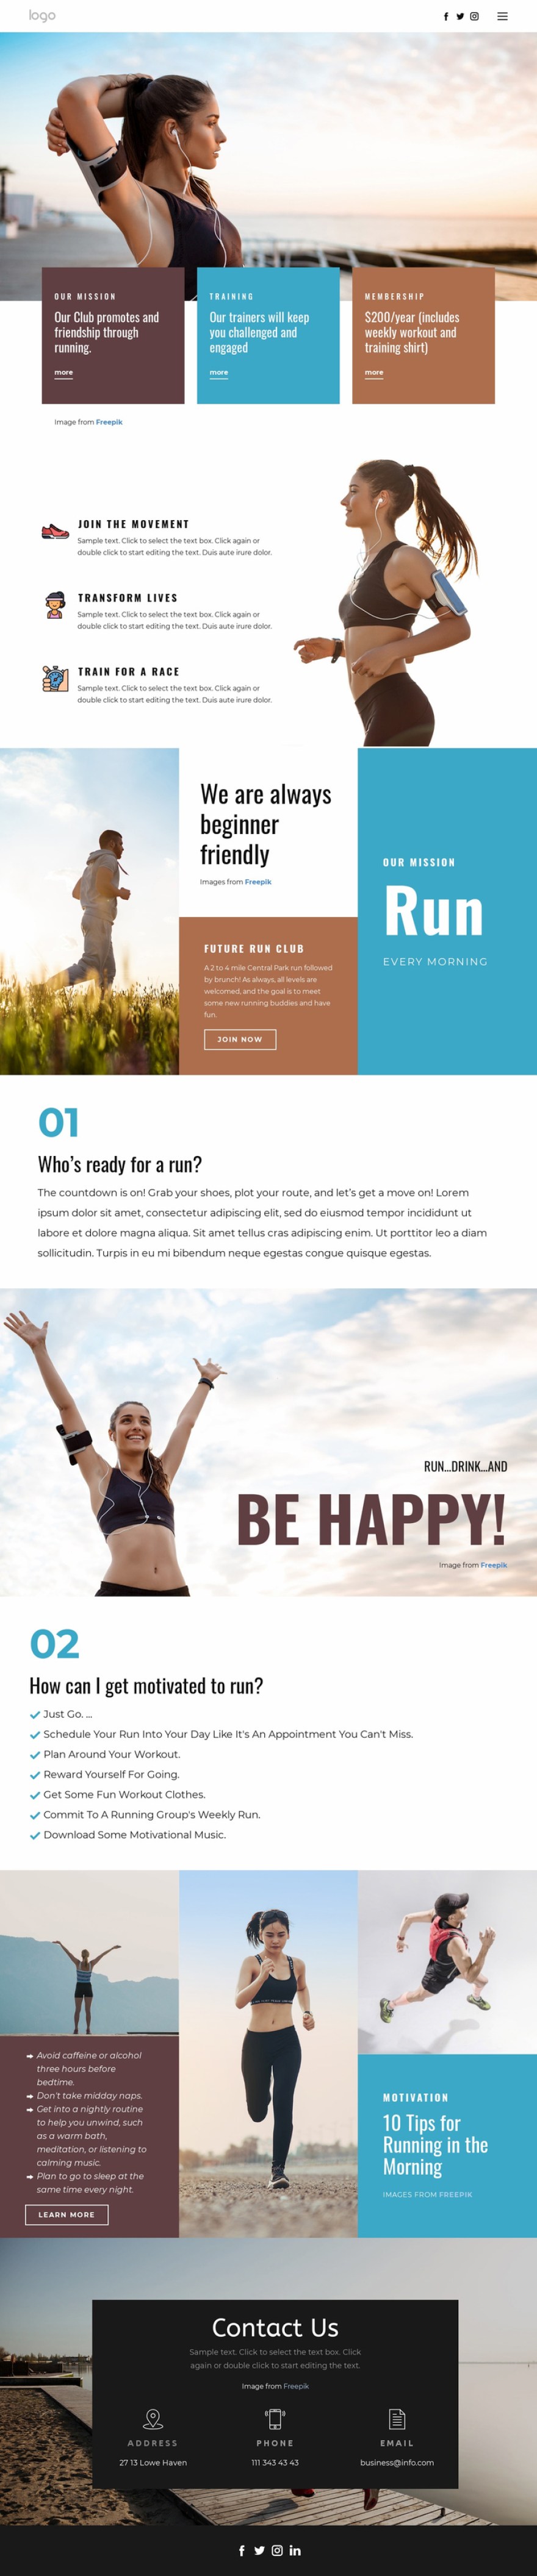 Picture of: Running club for sports Squarespace Template Alternative